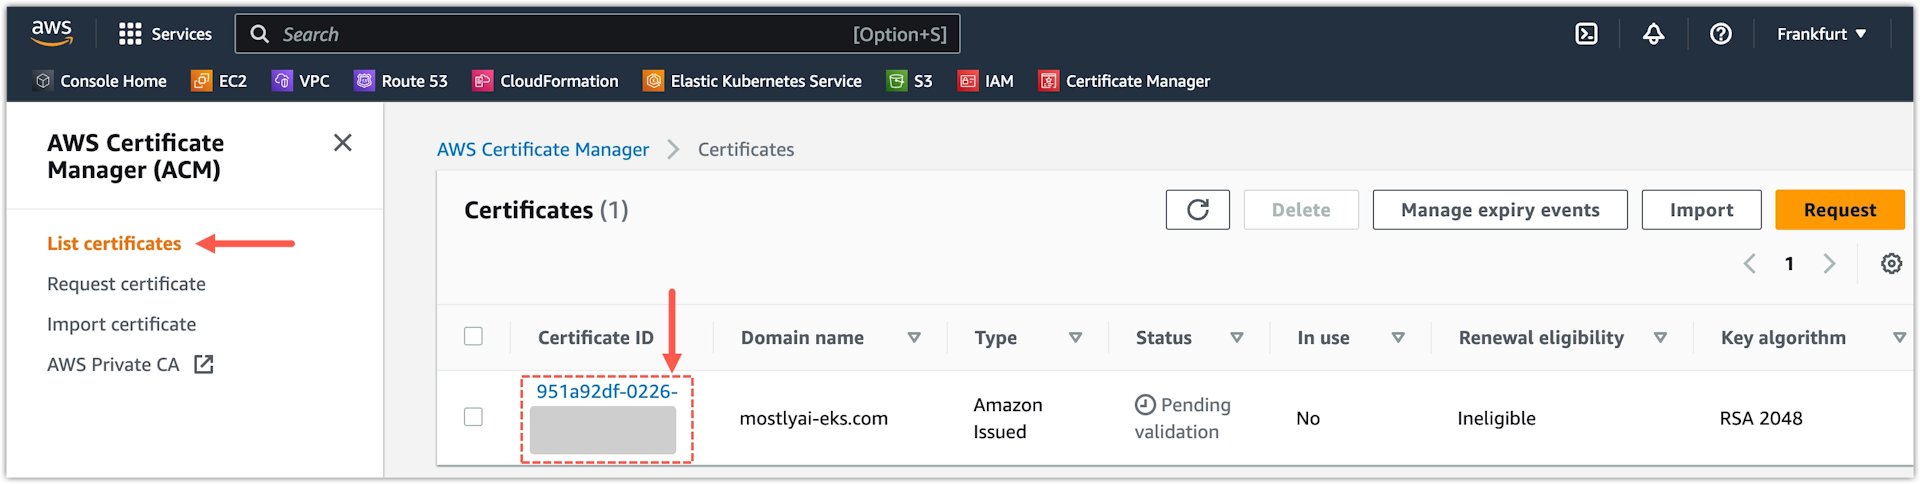 AWS Certificate Manager - open the certificate request with pending validation